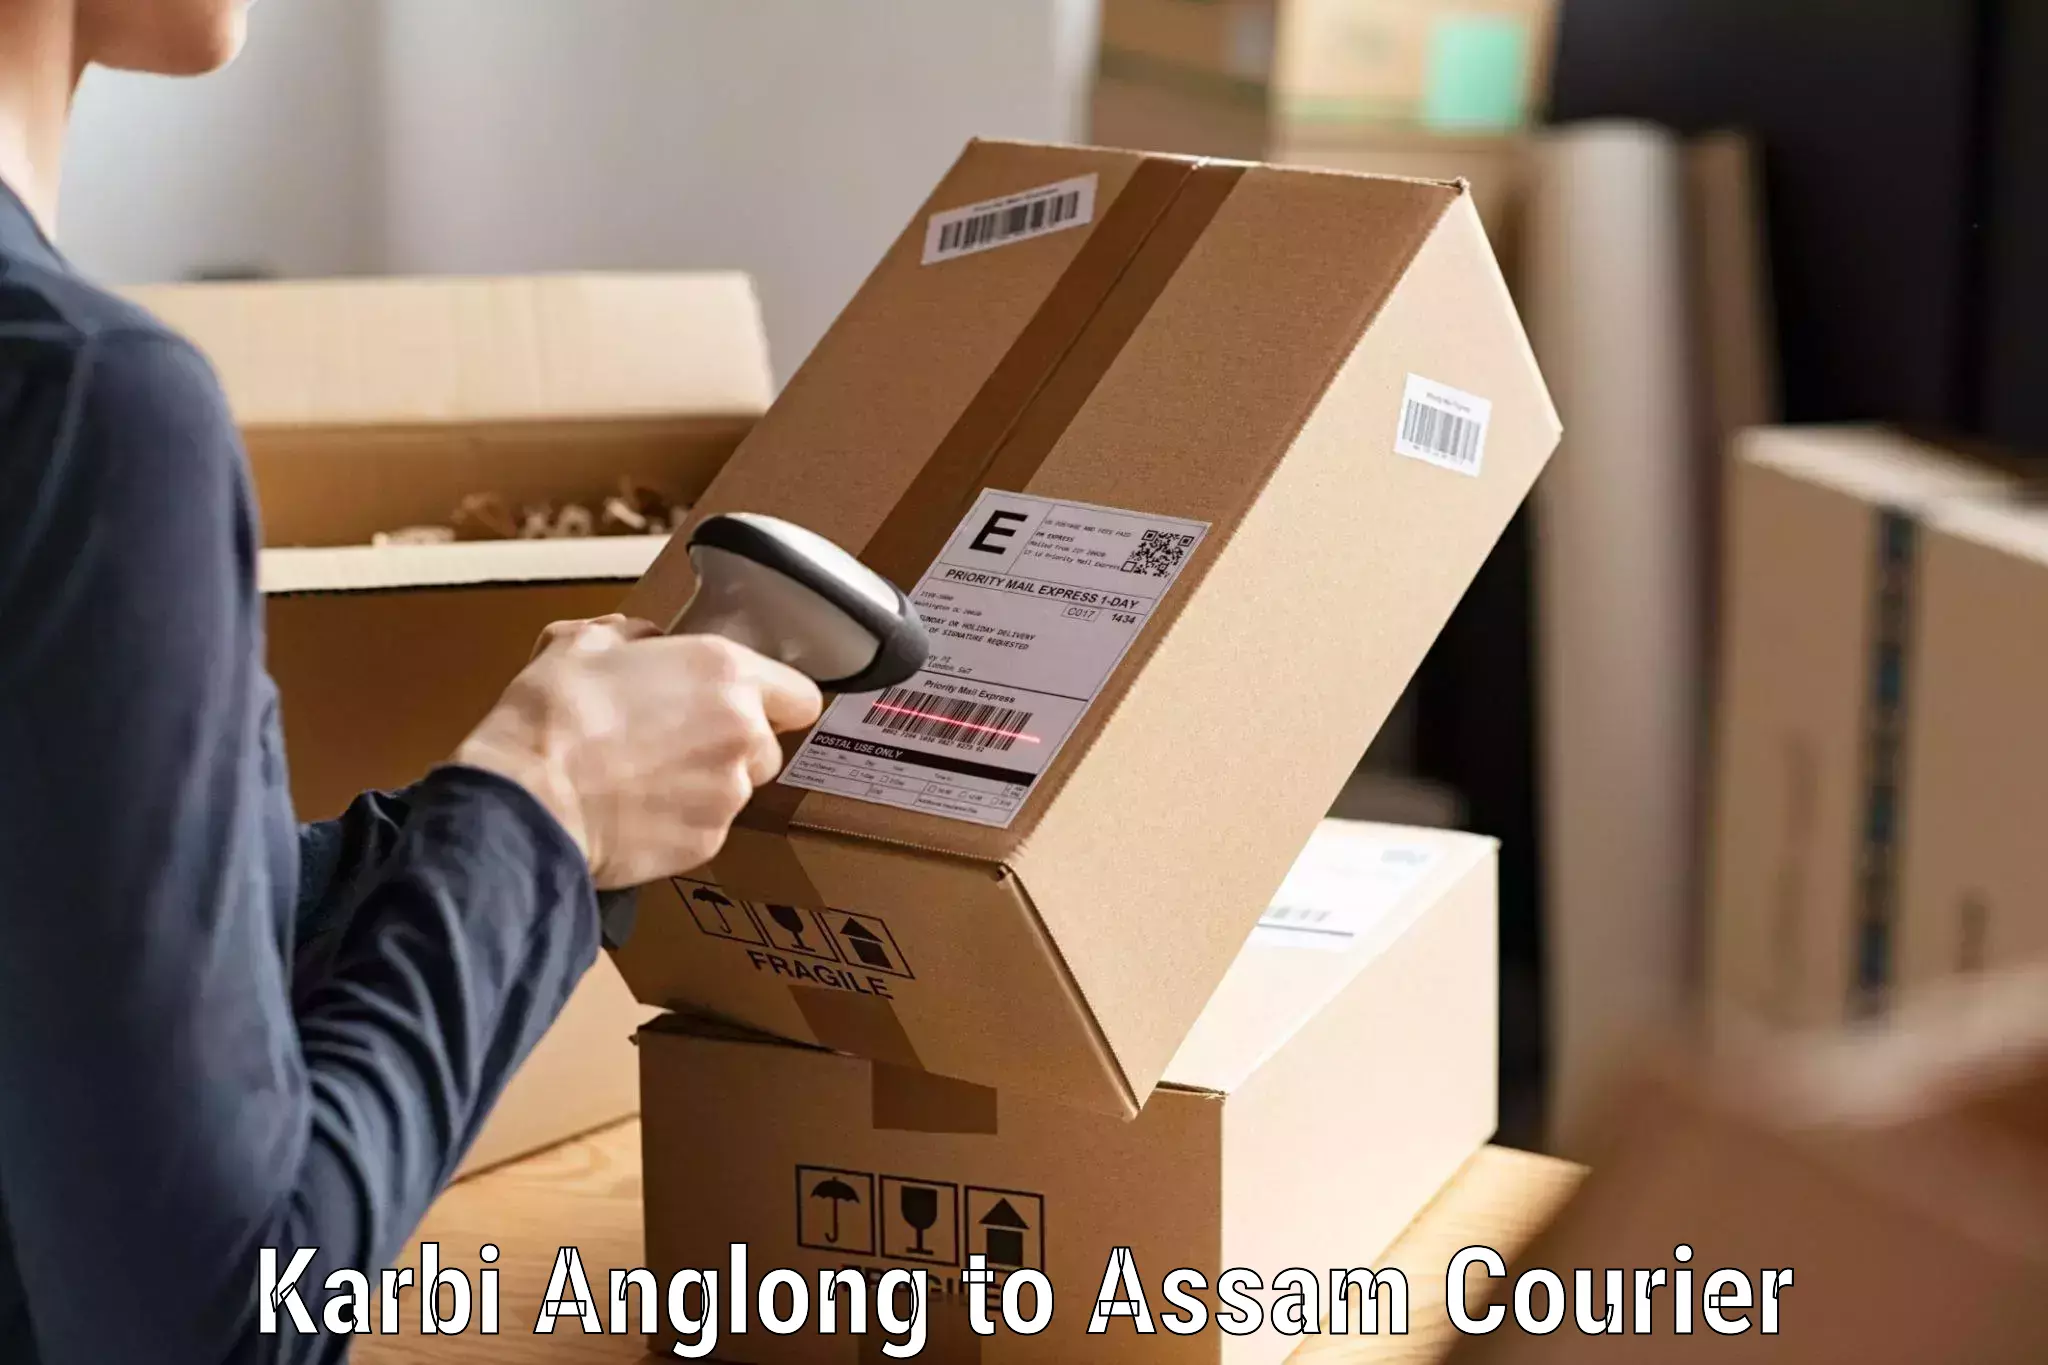 Courier service innovation Karbi Anglong to Digboi